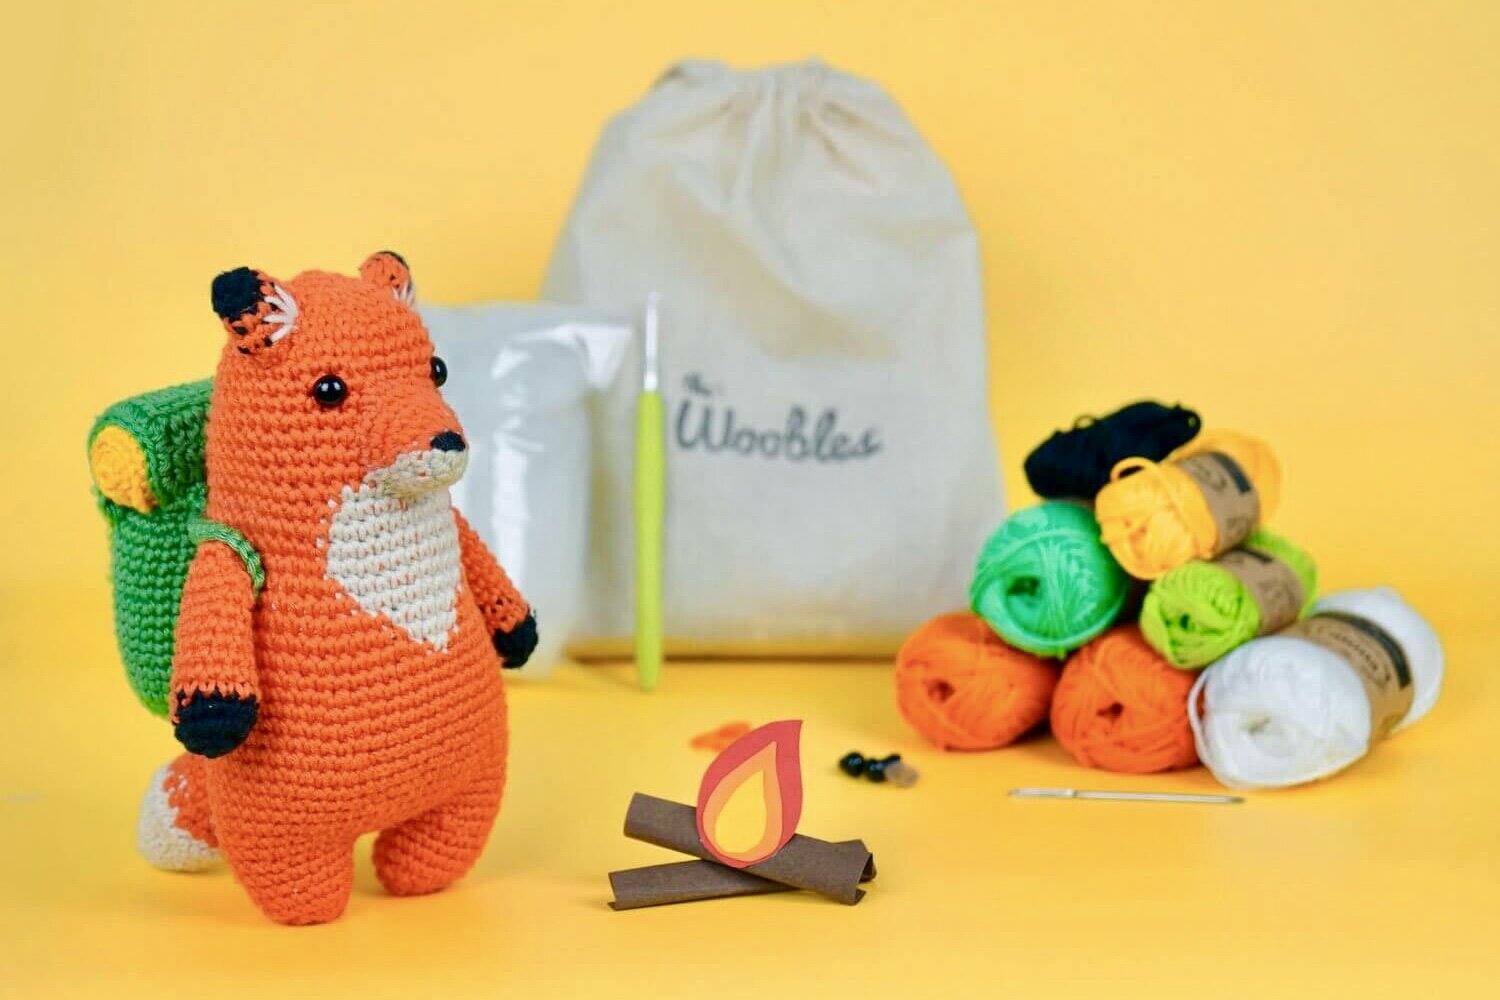 15 popular arts-and-crafts kits adults will love